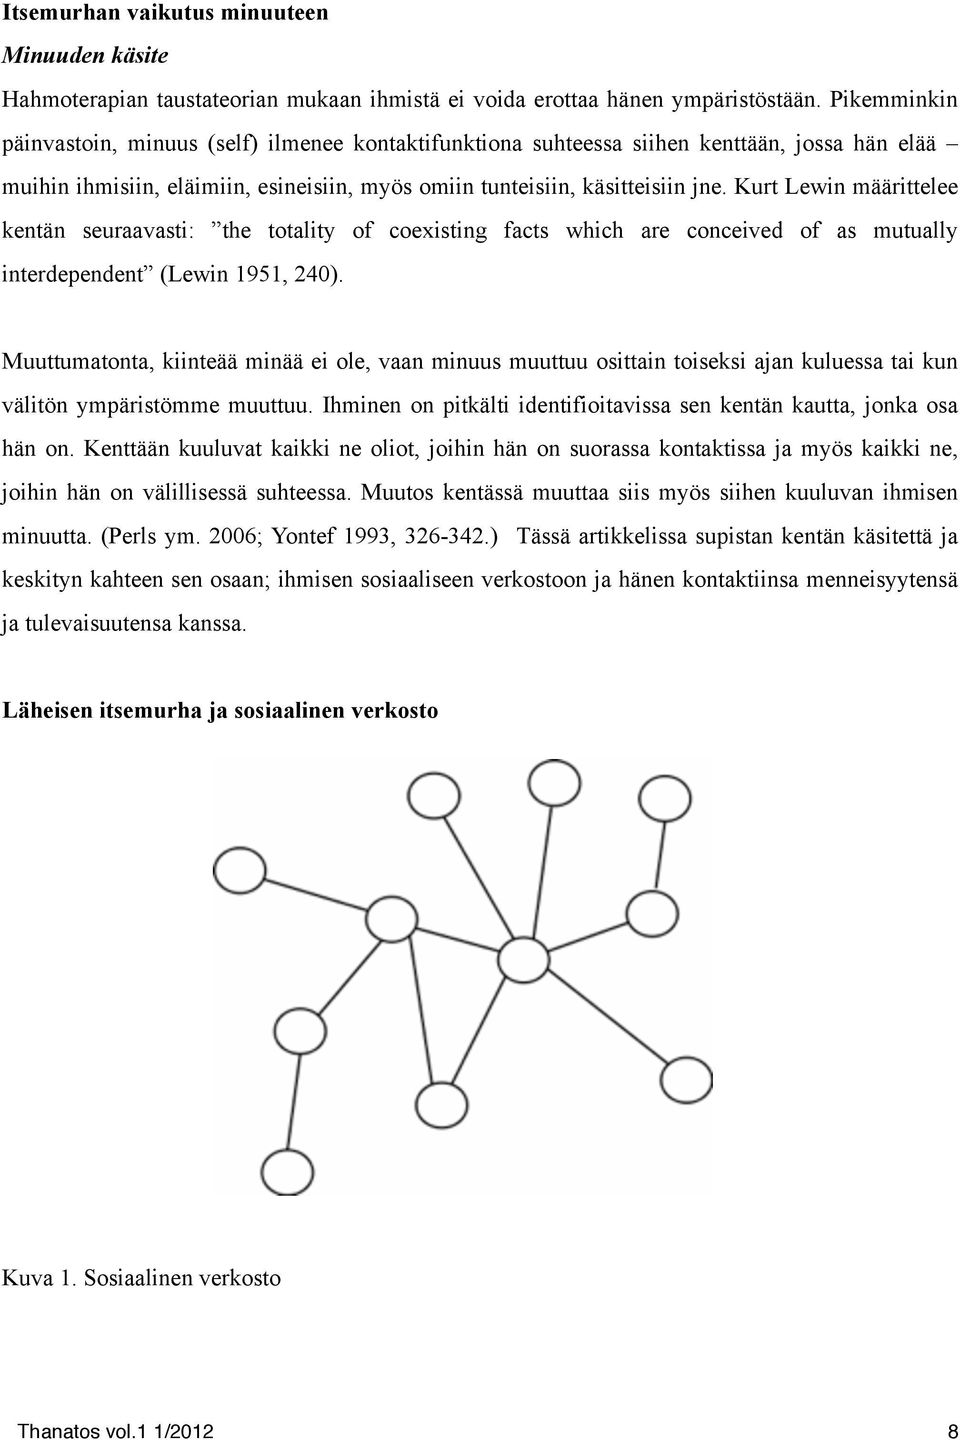 Kurt Lewin määrittelee kentän seuraavasti: the totality of coexisting facts which are conceived of as mutually interdependent (Lewin 1951, 240).